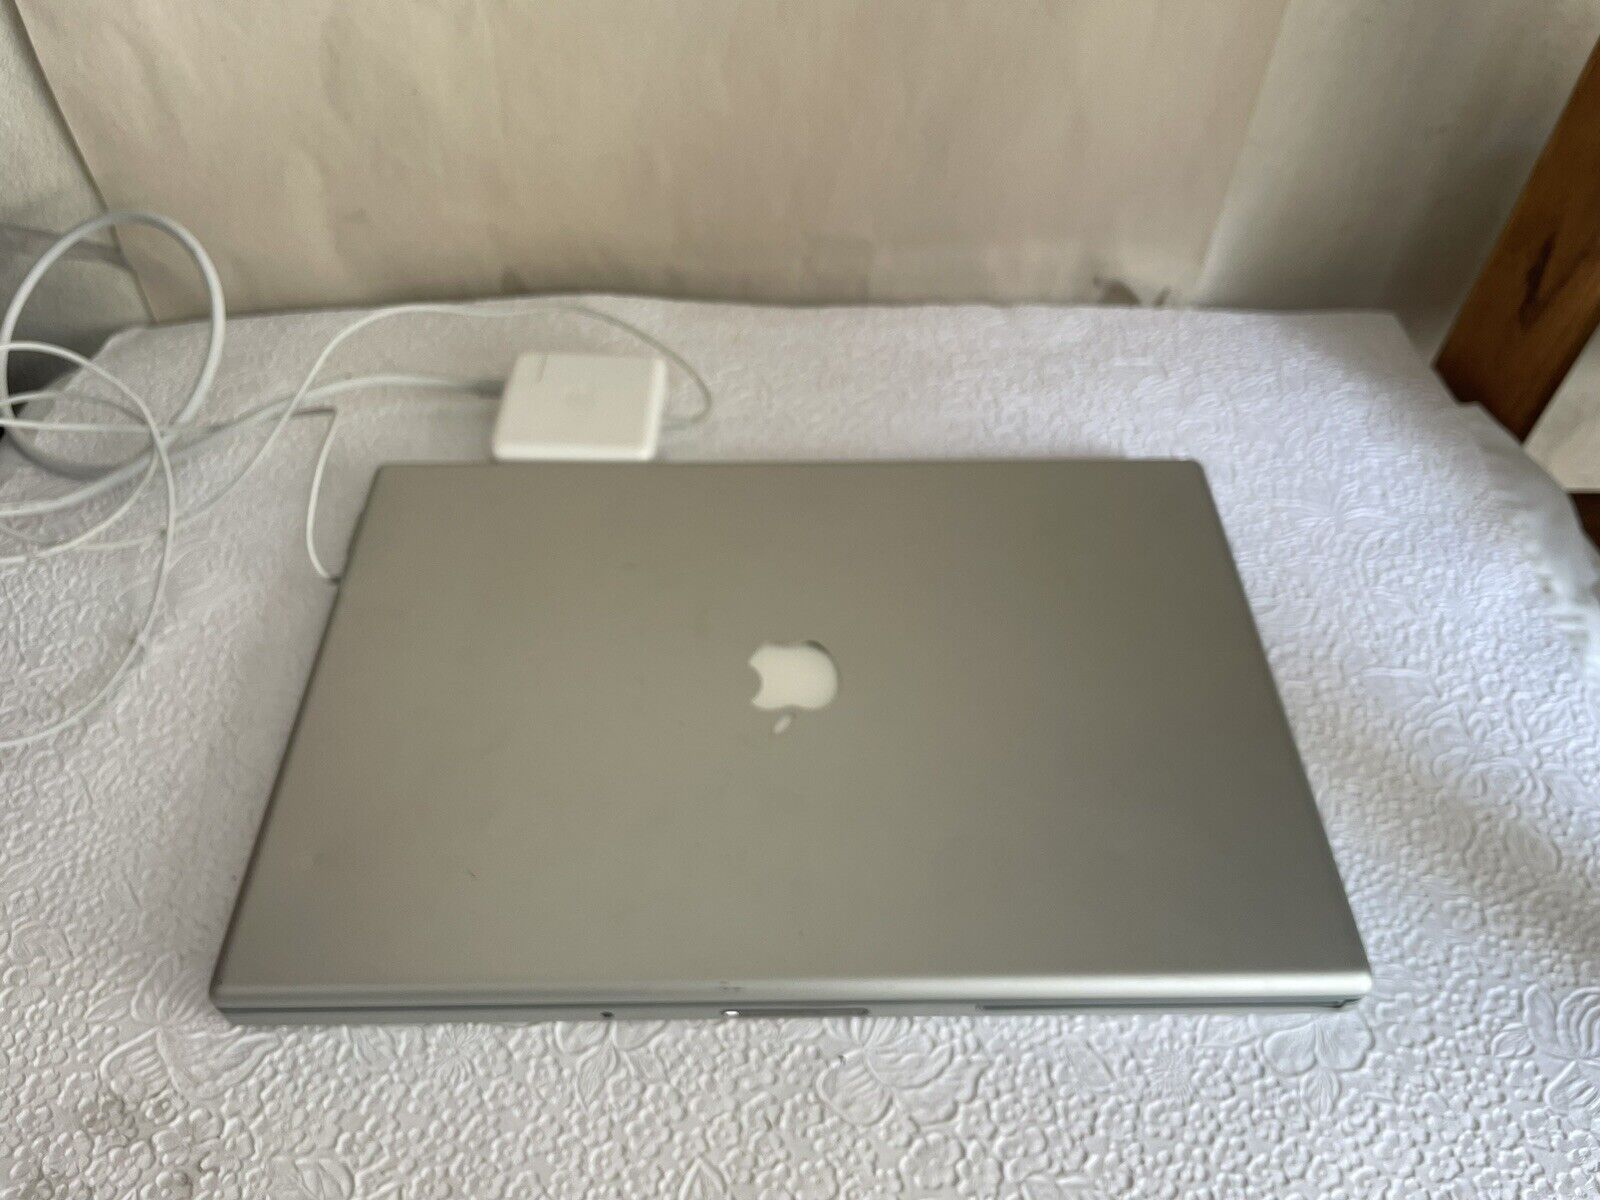 Vintage Apple Macbook pro 2008 A1261 Battery no working